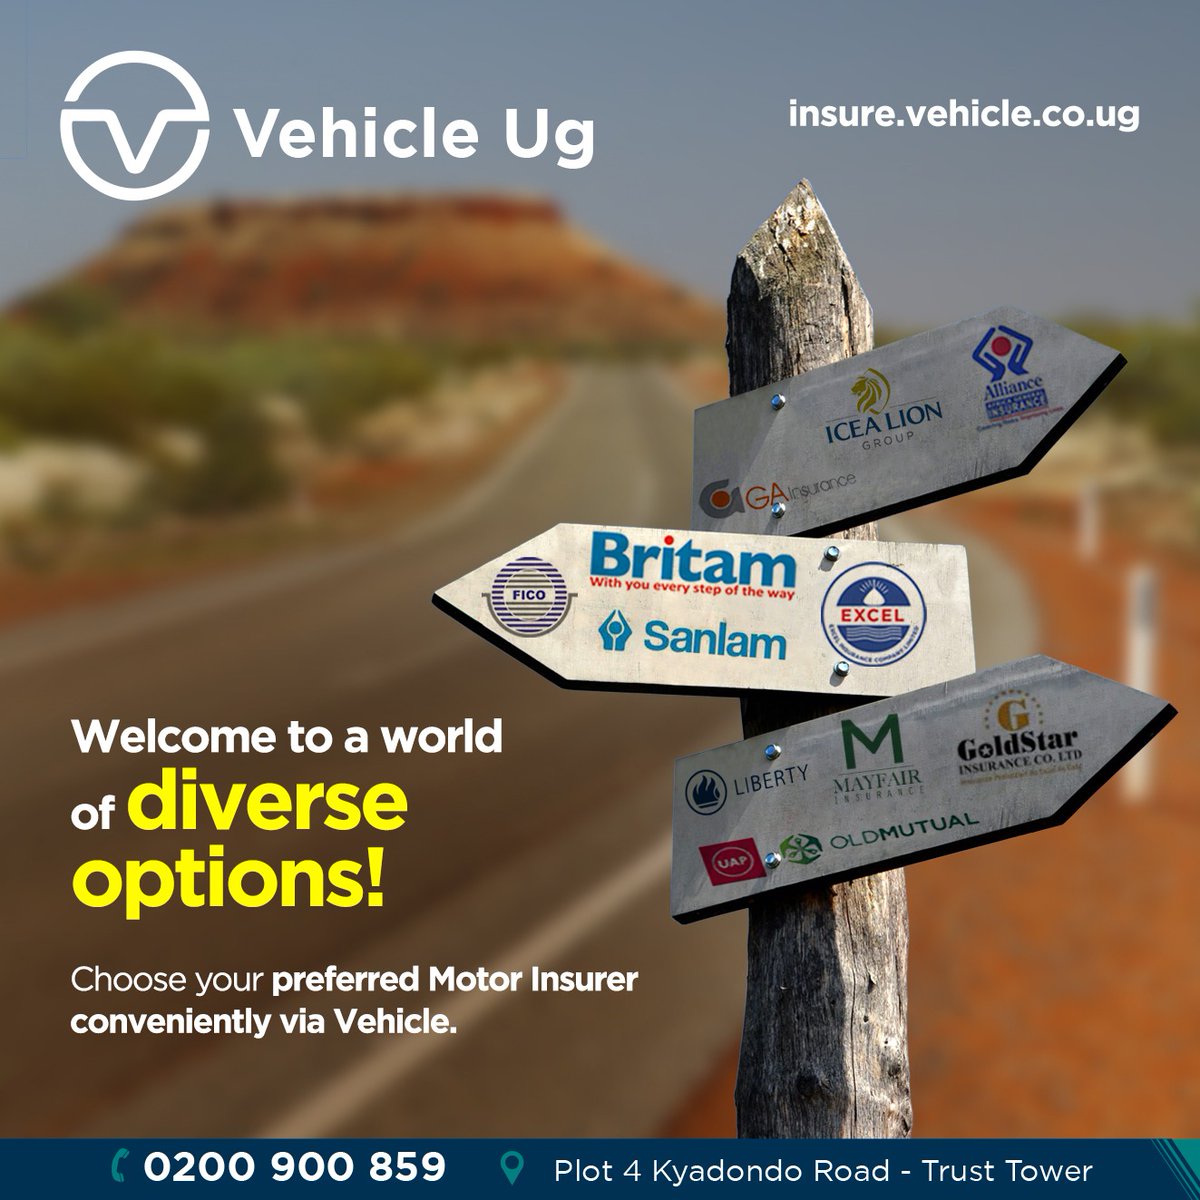 Welcome to a world of diverse options! 

Choose your preferred Motor Insurer conveniently via Vehicle.

#InsuranceWeek2023 #DrivingInsuranceGrowth #BeInsured #Insurance #MondayMotivation #BBTitans